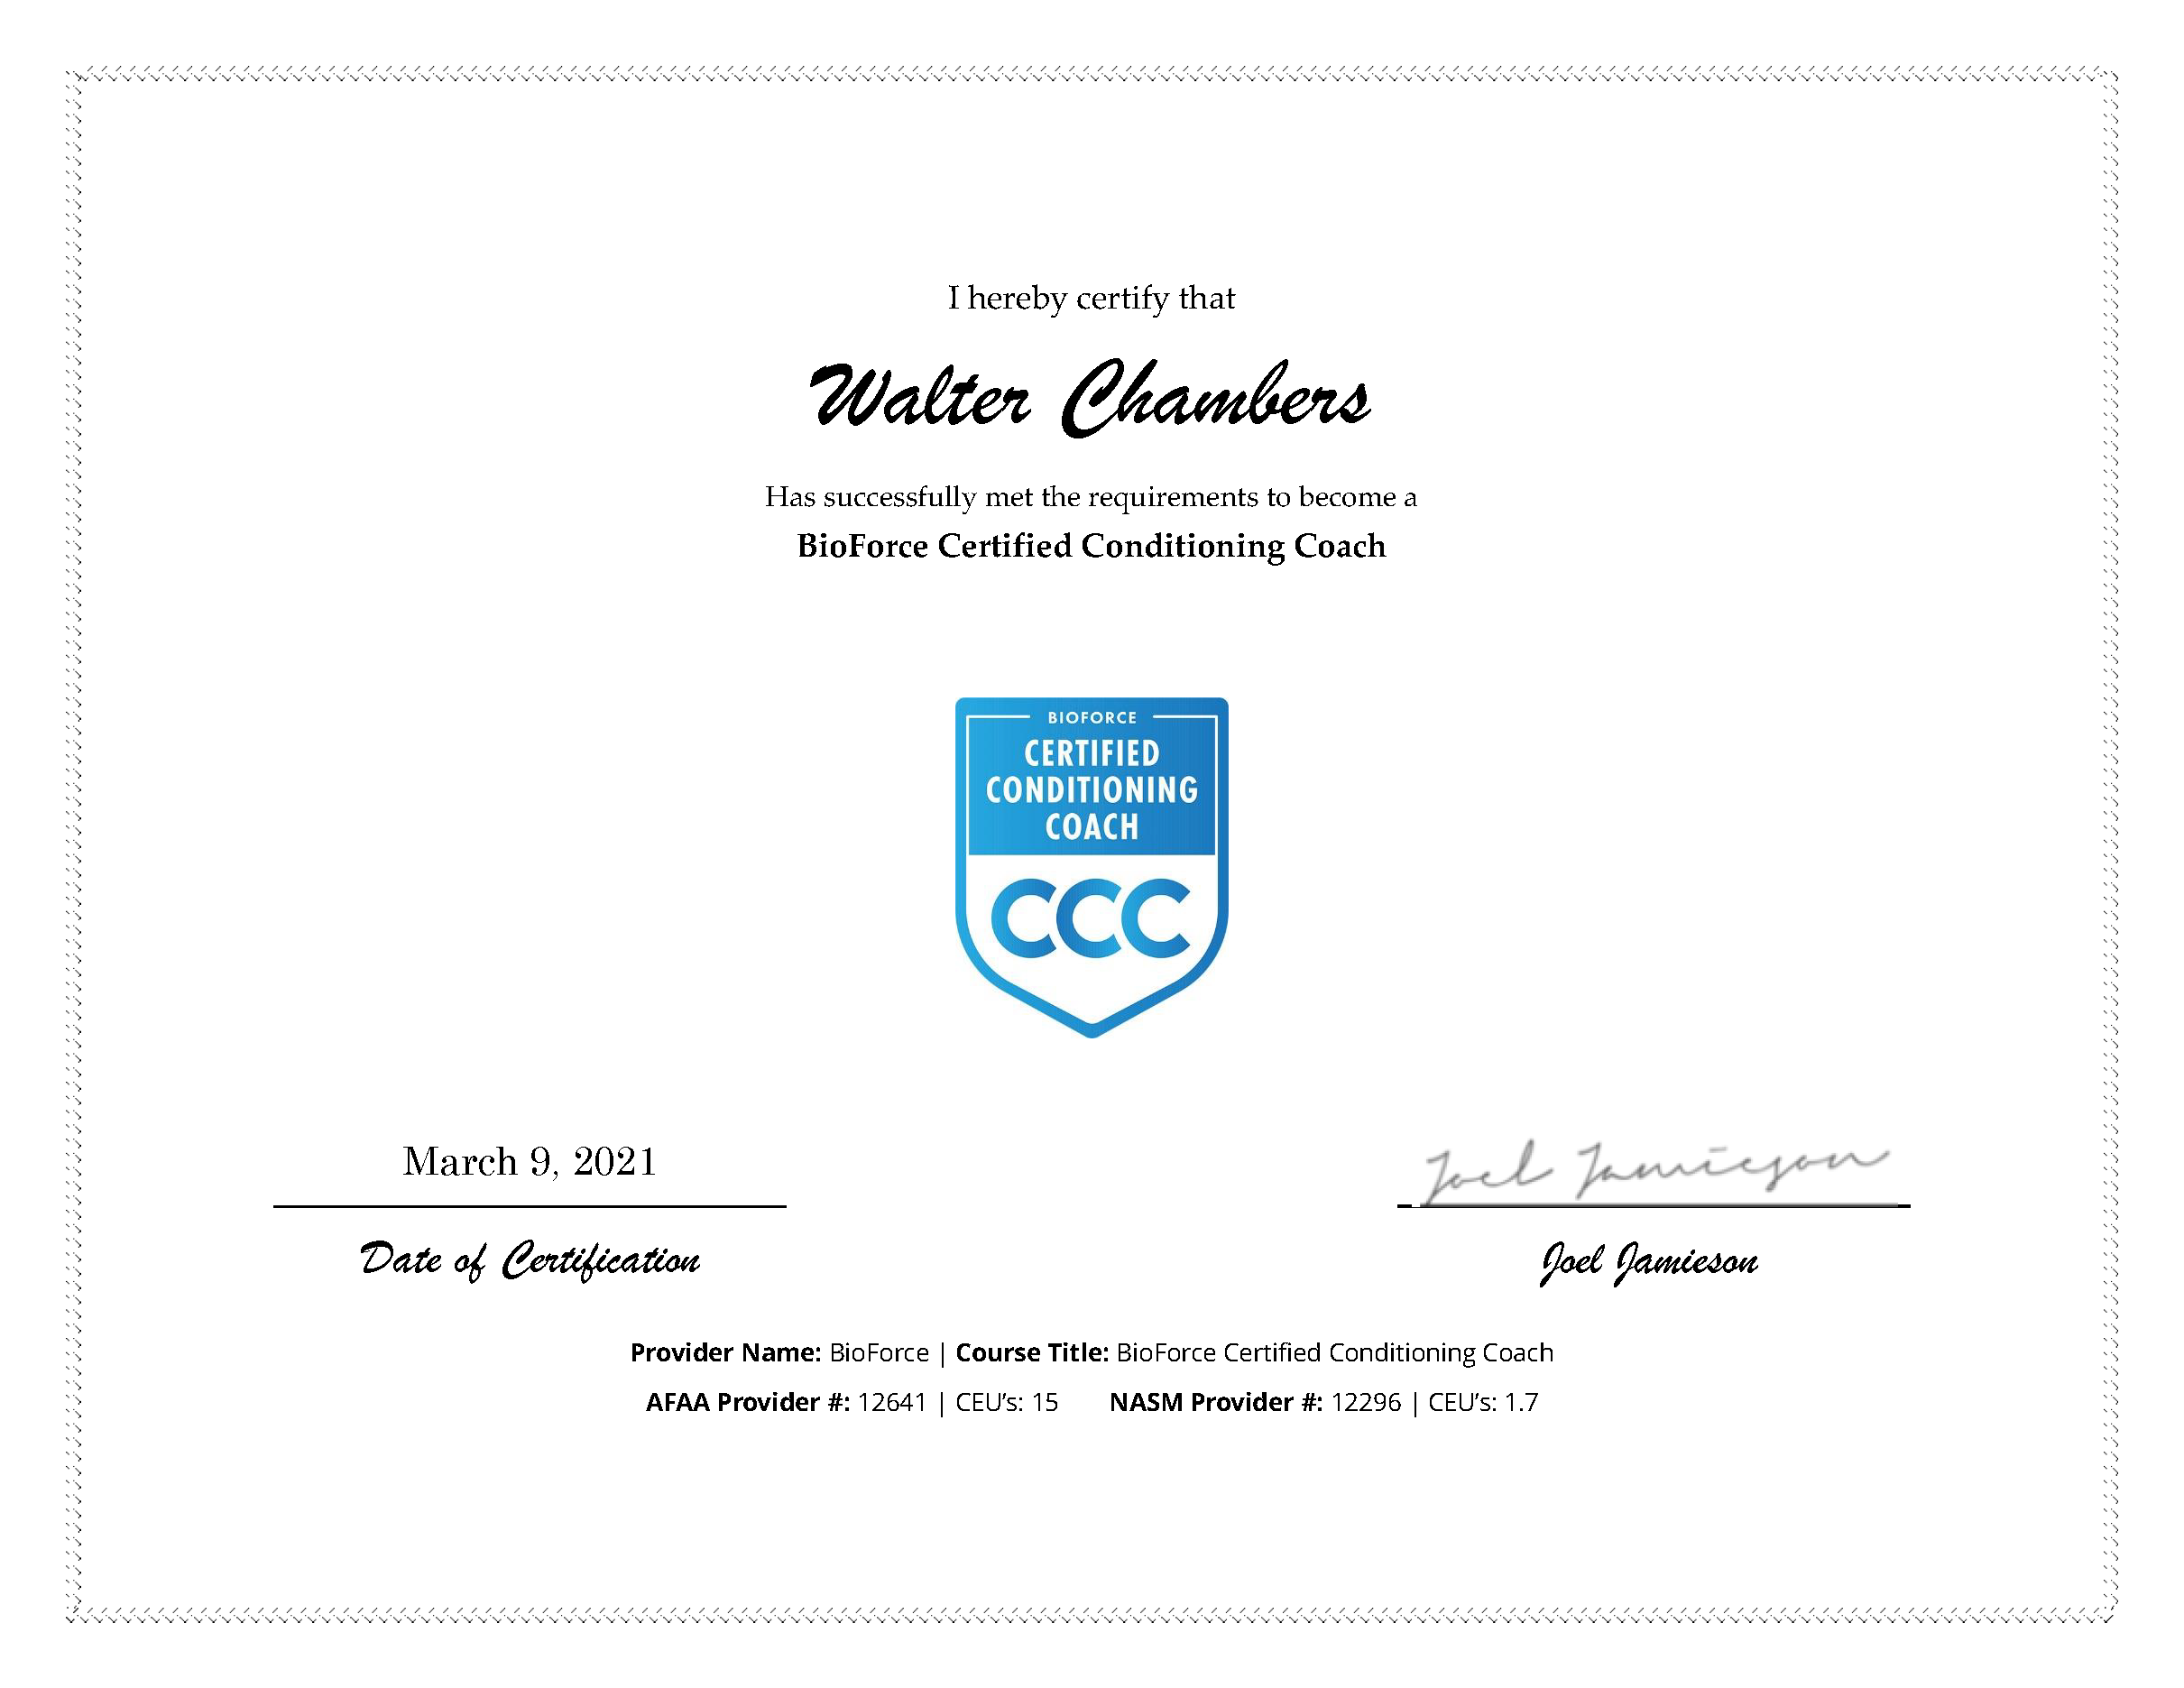 DIgital CCC Certificate - Walter Chambers.png